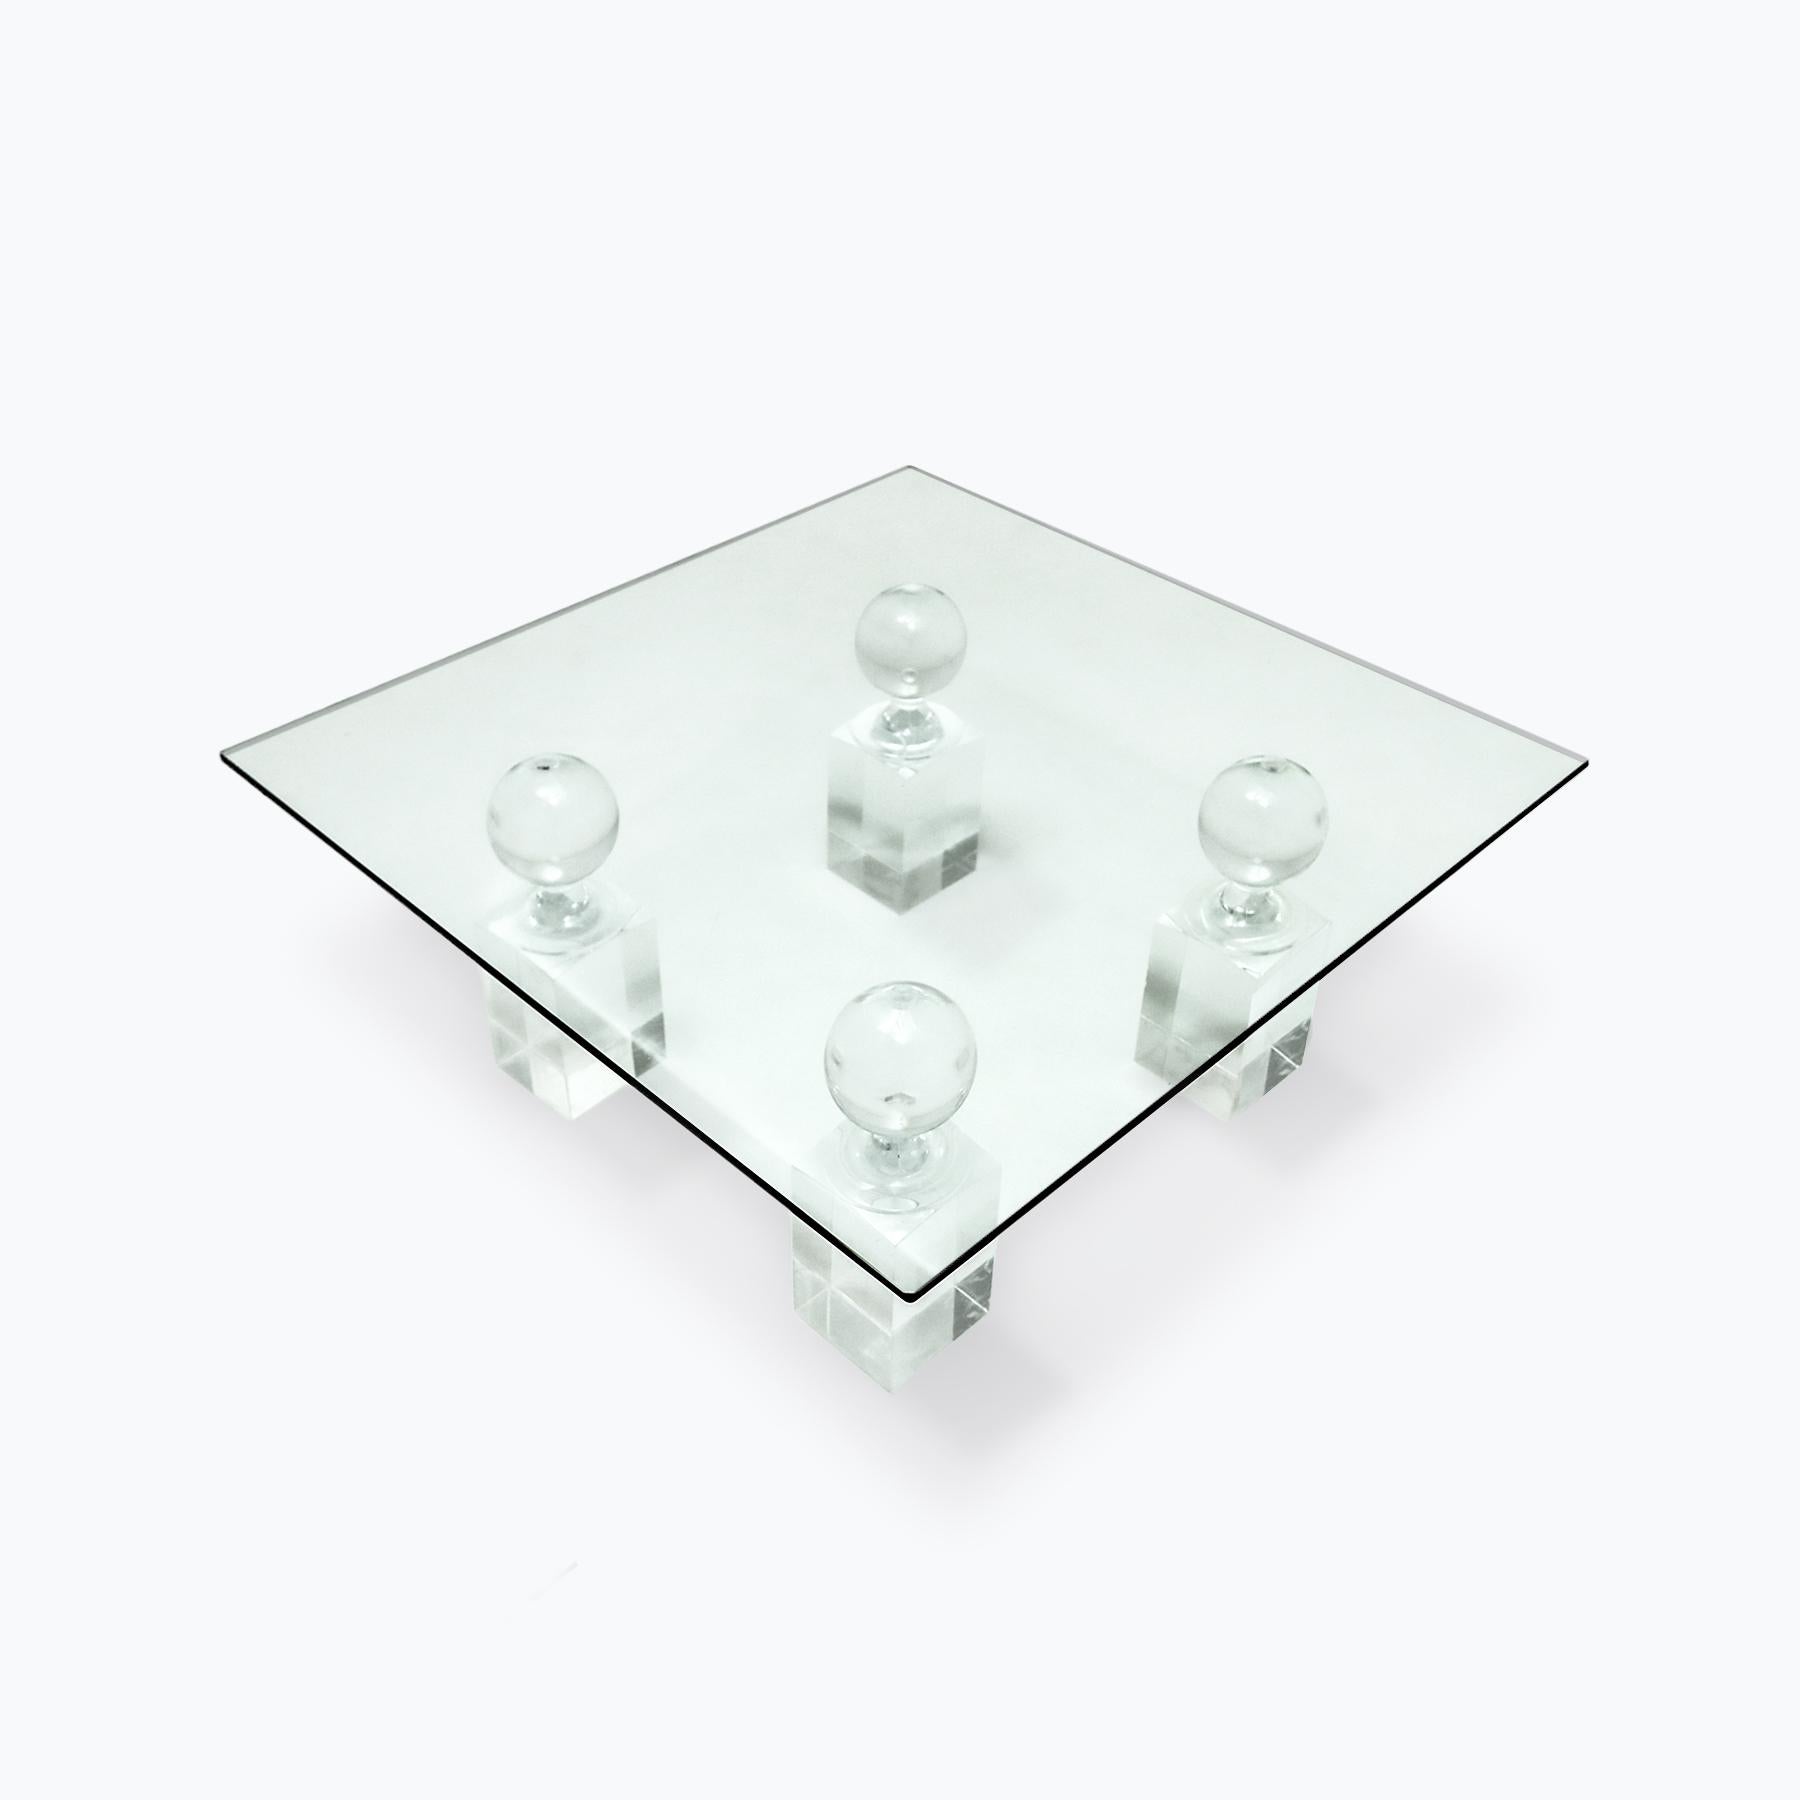 Very unusual vintage American lucite and glass 4 pillar, roulette win marker coffee table dating from the 1970s.

This table is a statement in its own right but possibly has more appeal if you happen to love playing roulette. The free floating glass